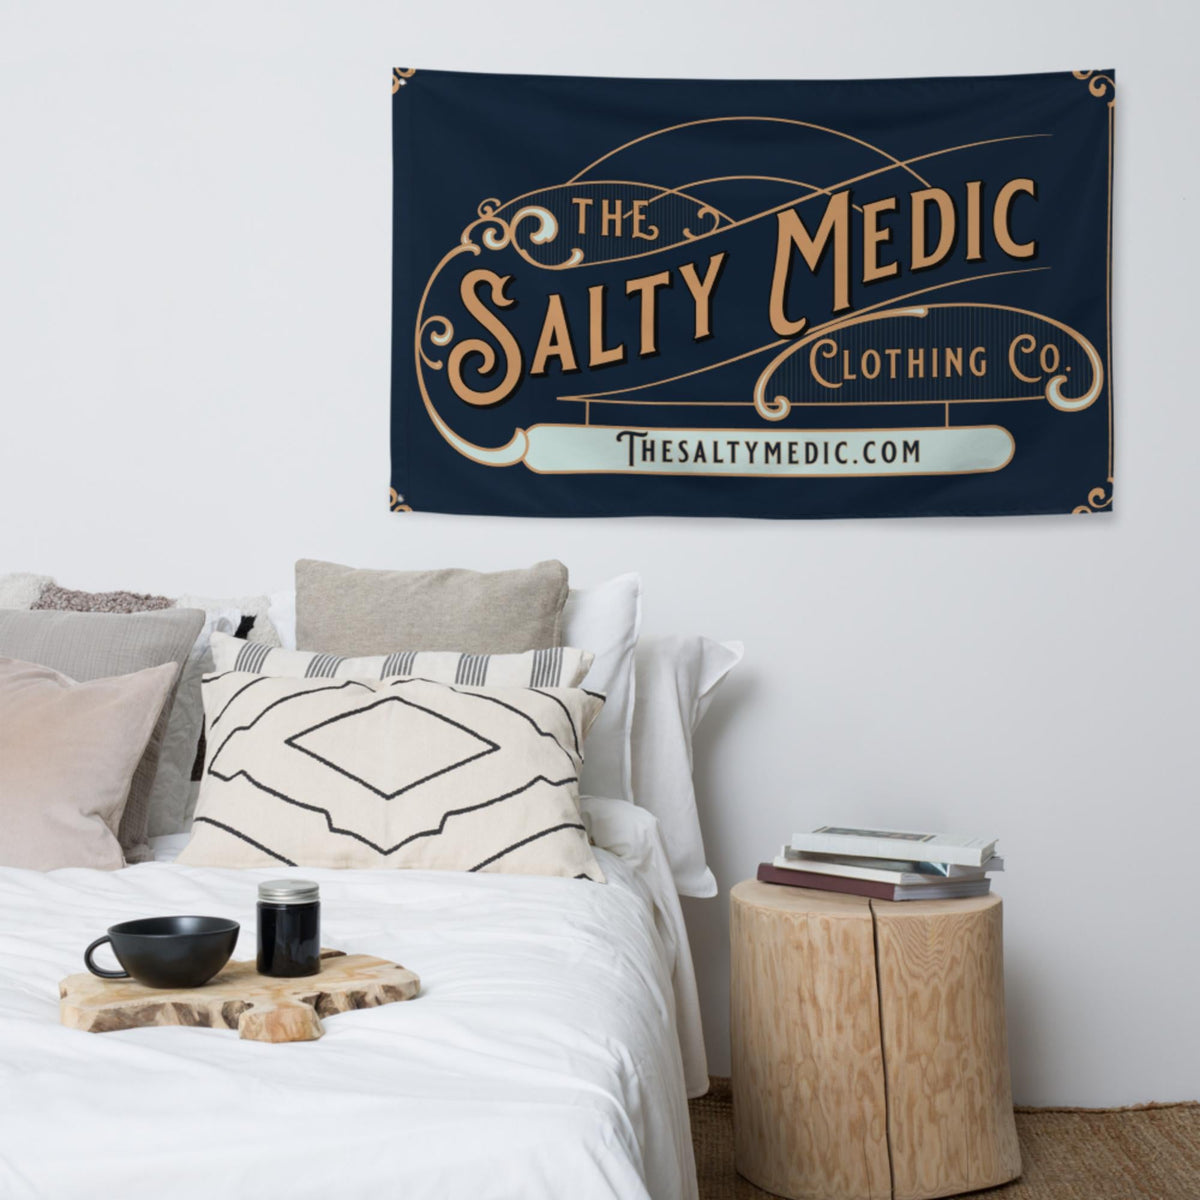 Salty Medic Clothing Co. Flag - Salty Medic Clothing Co.